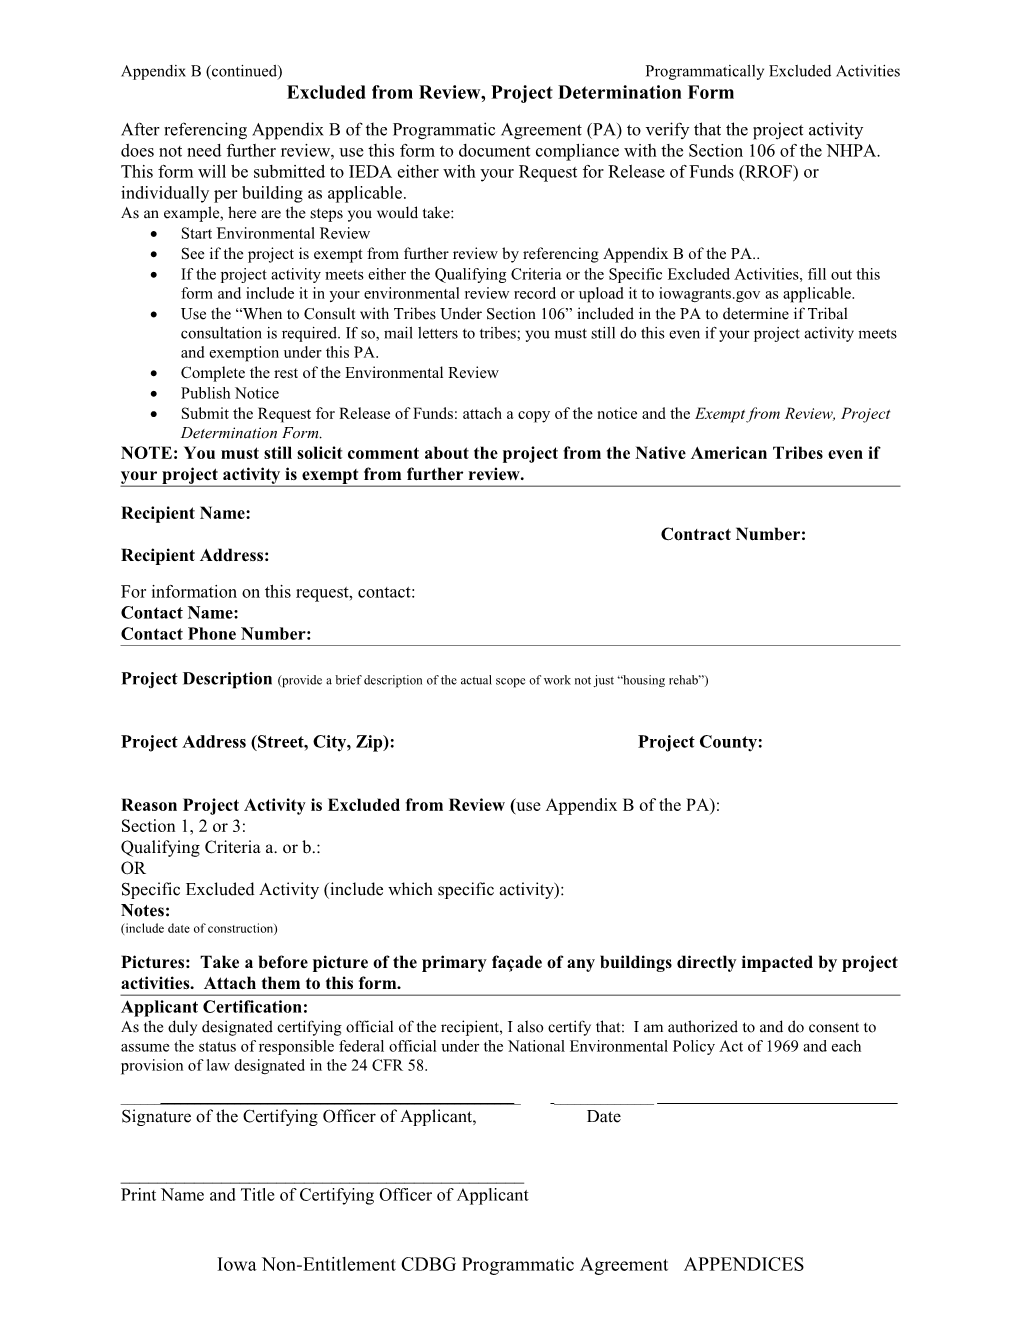 Excluded from Review, Project Determination Form